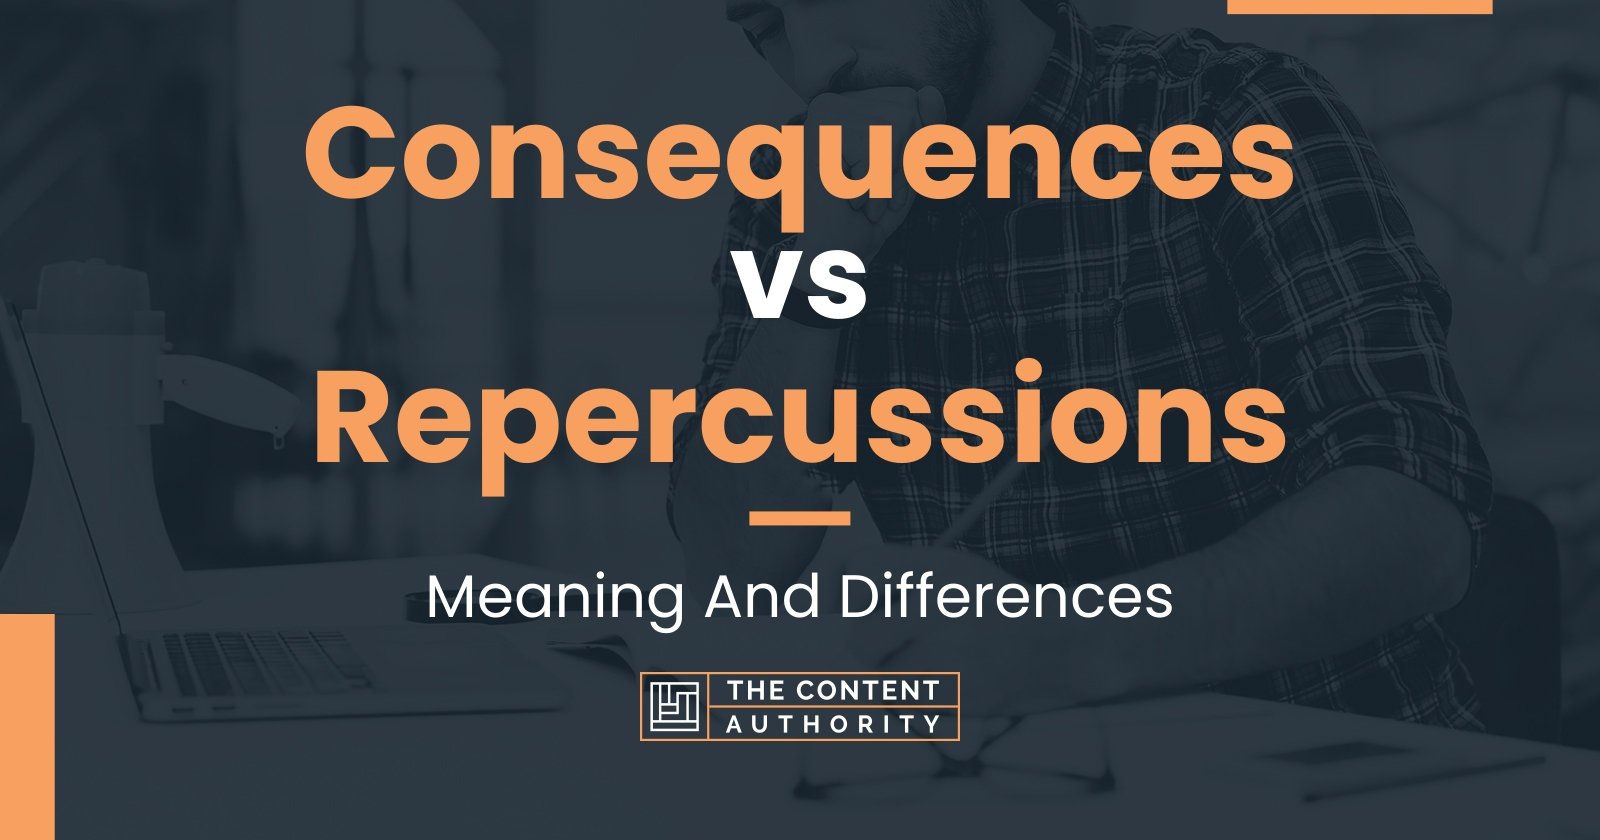 Consequences vs Repercussions: Meaning And Differences